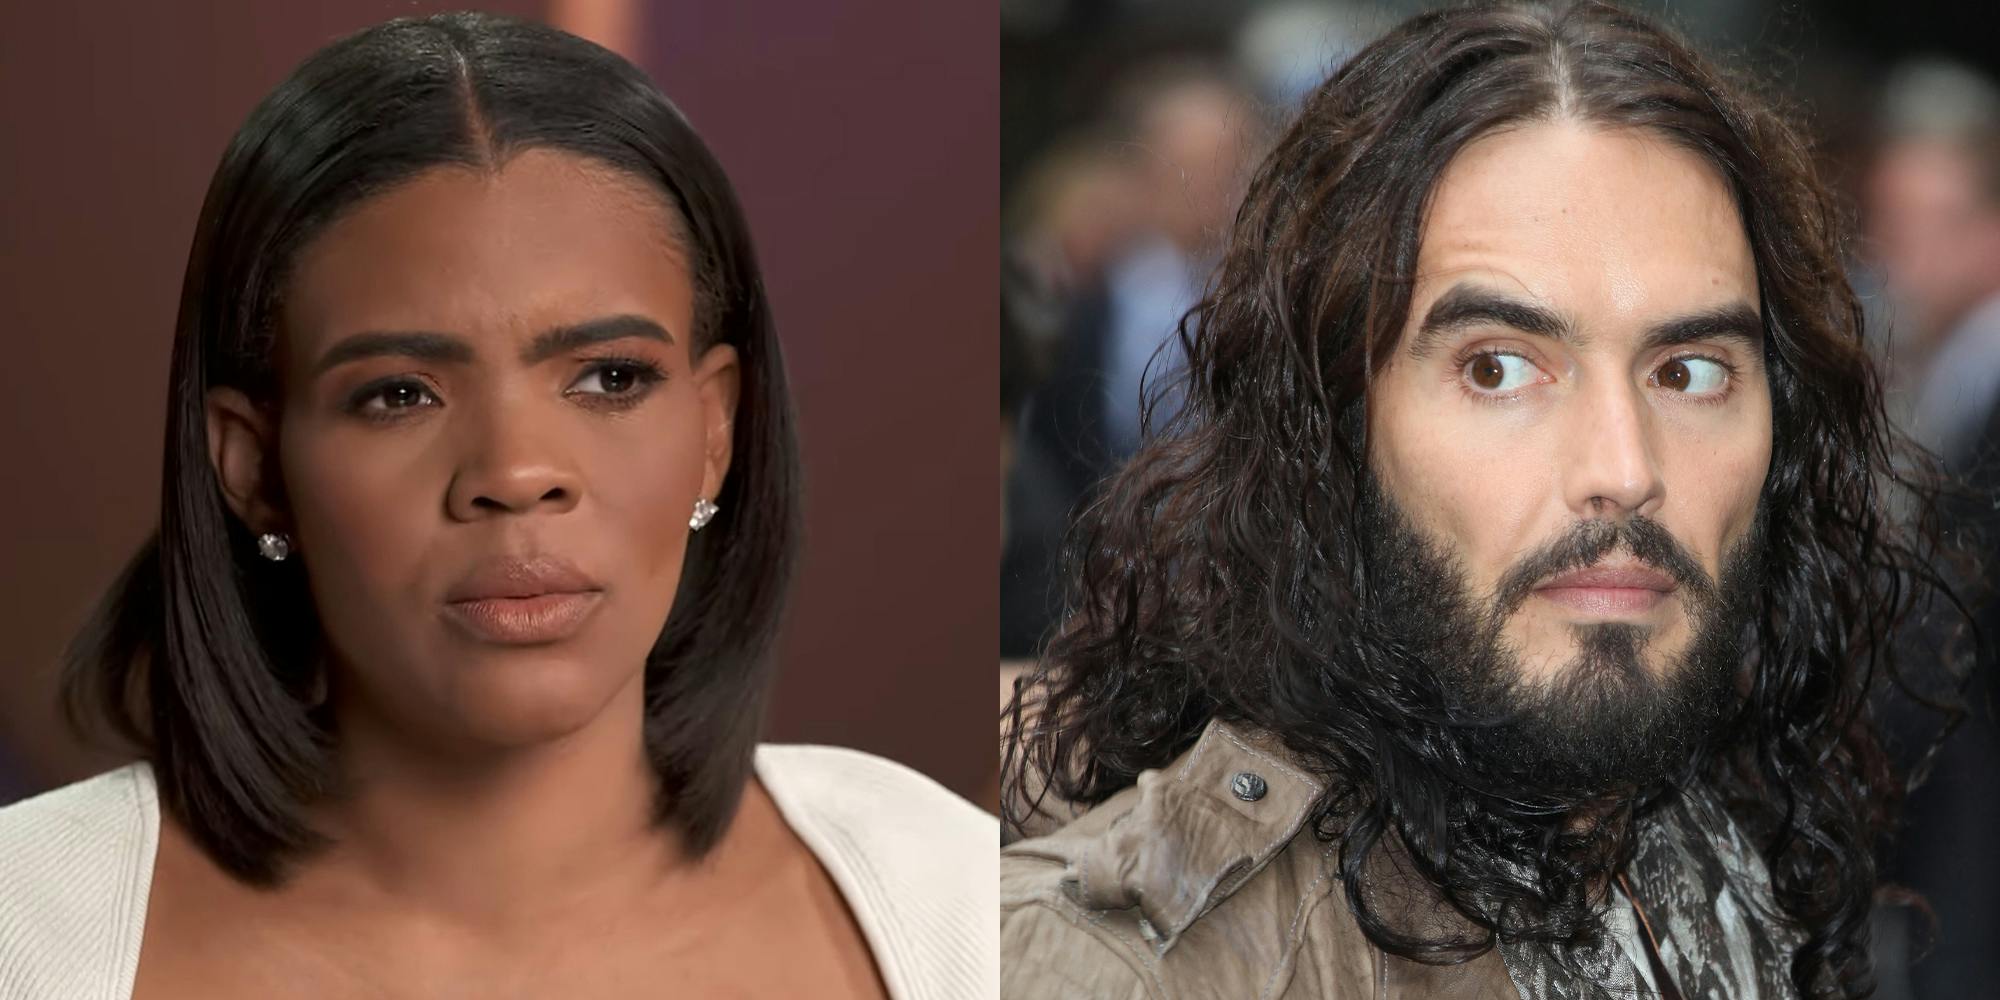 Candace Owens calls Russel Brand allegations 'credible'